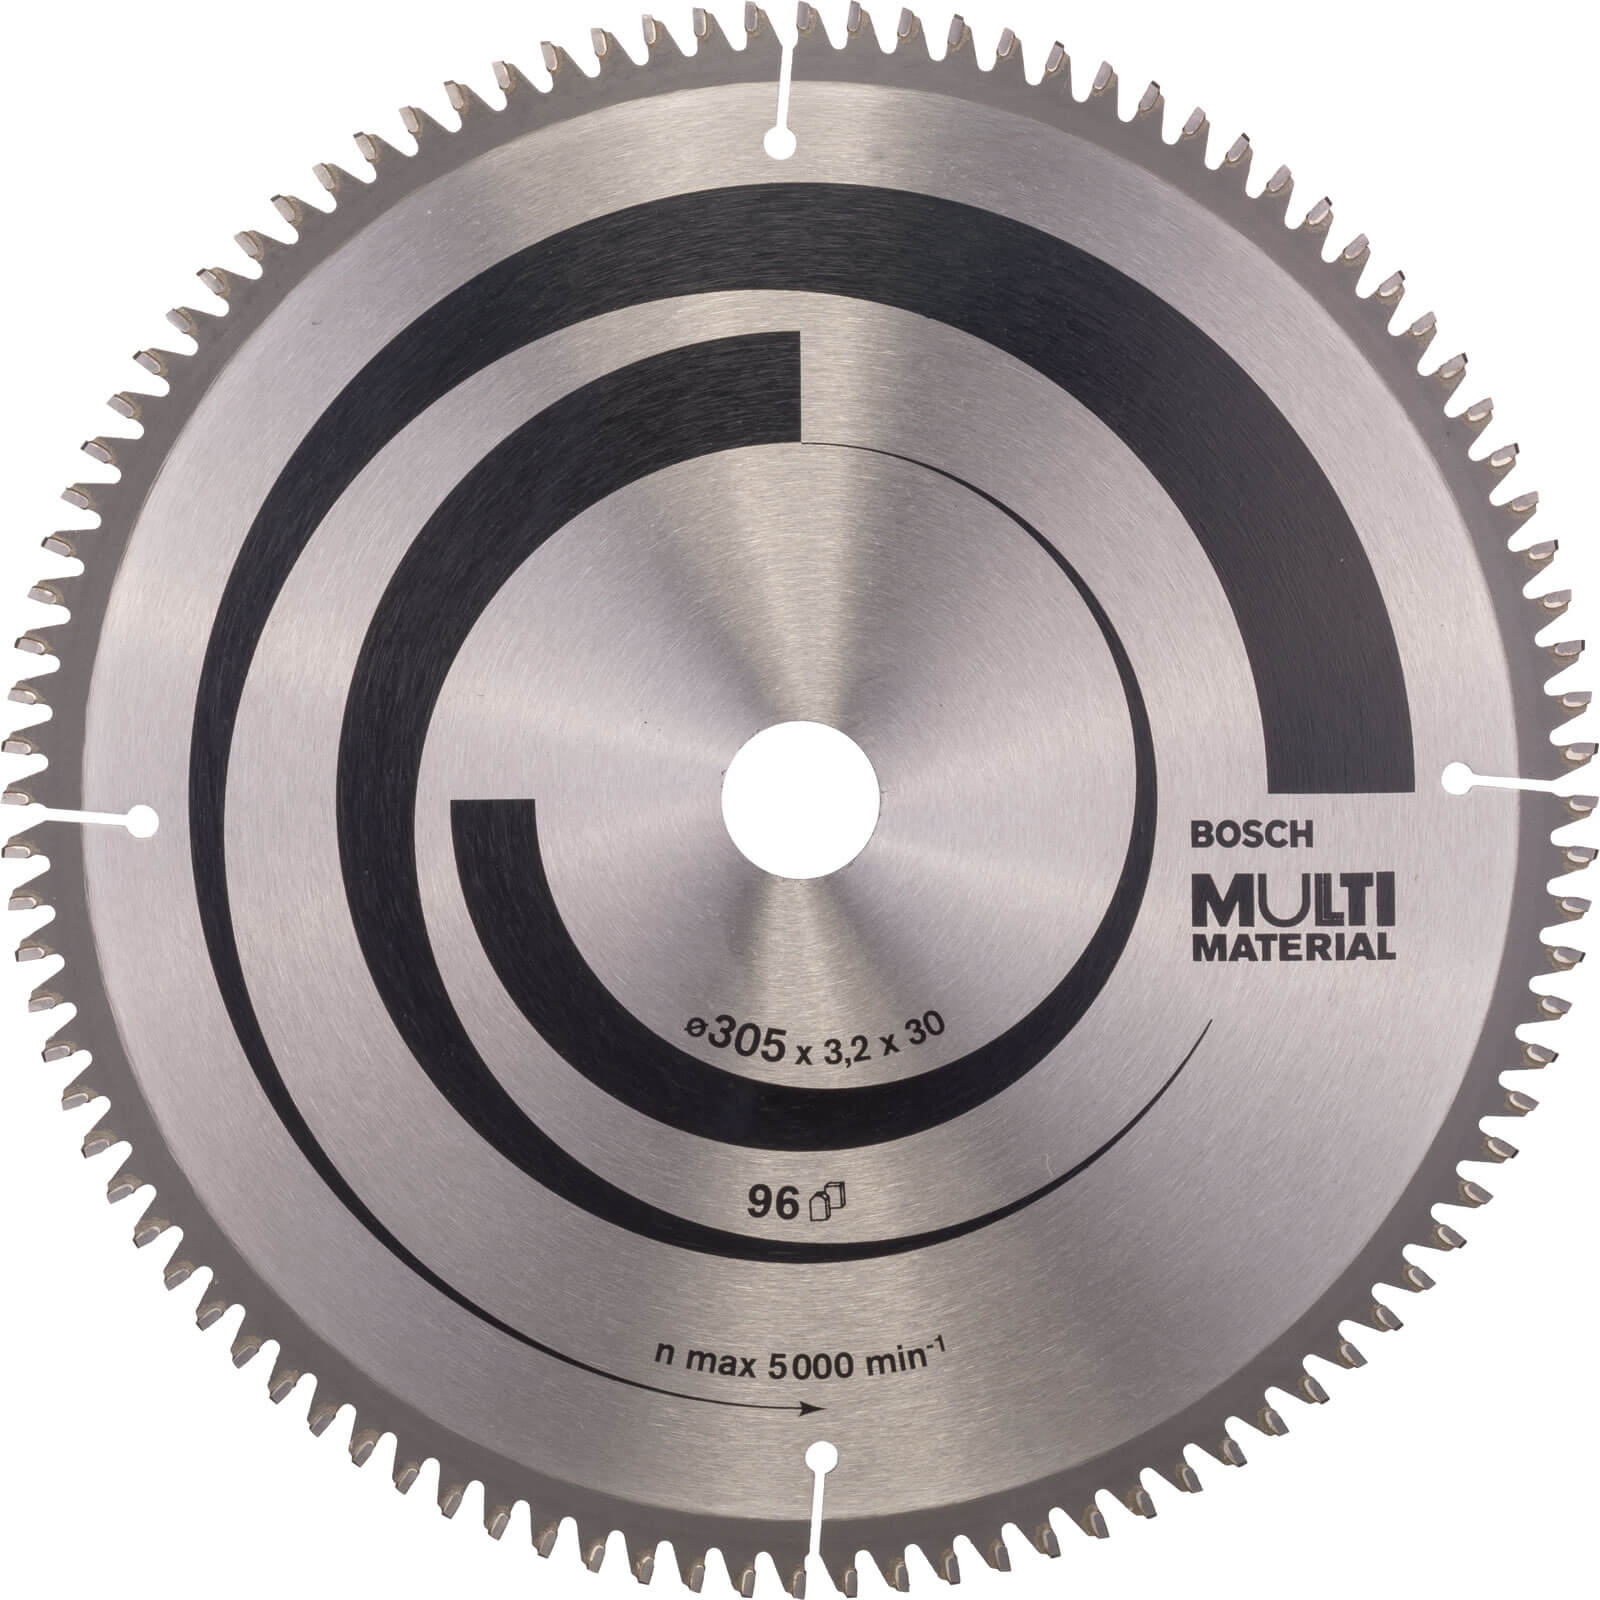 Image of Bosch Multi Material Cutting Mitre and Table Saw Blade 305mm 96T 30mm